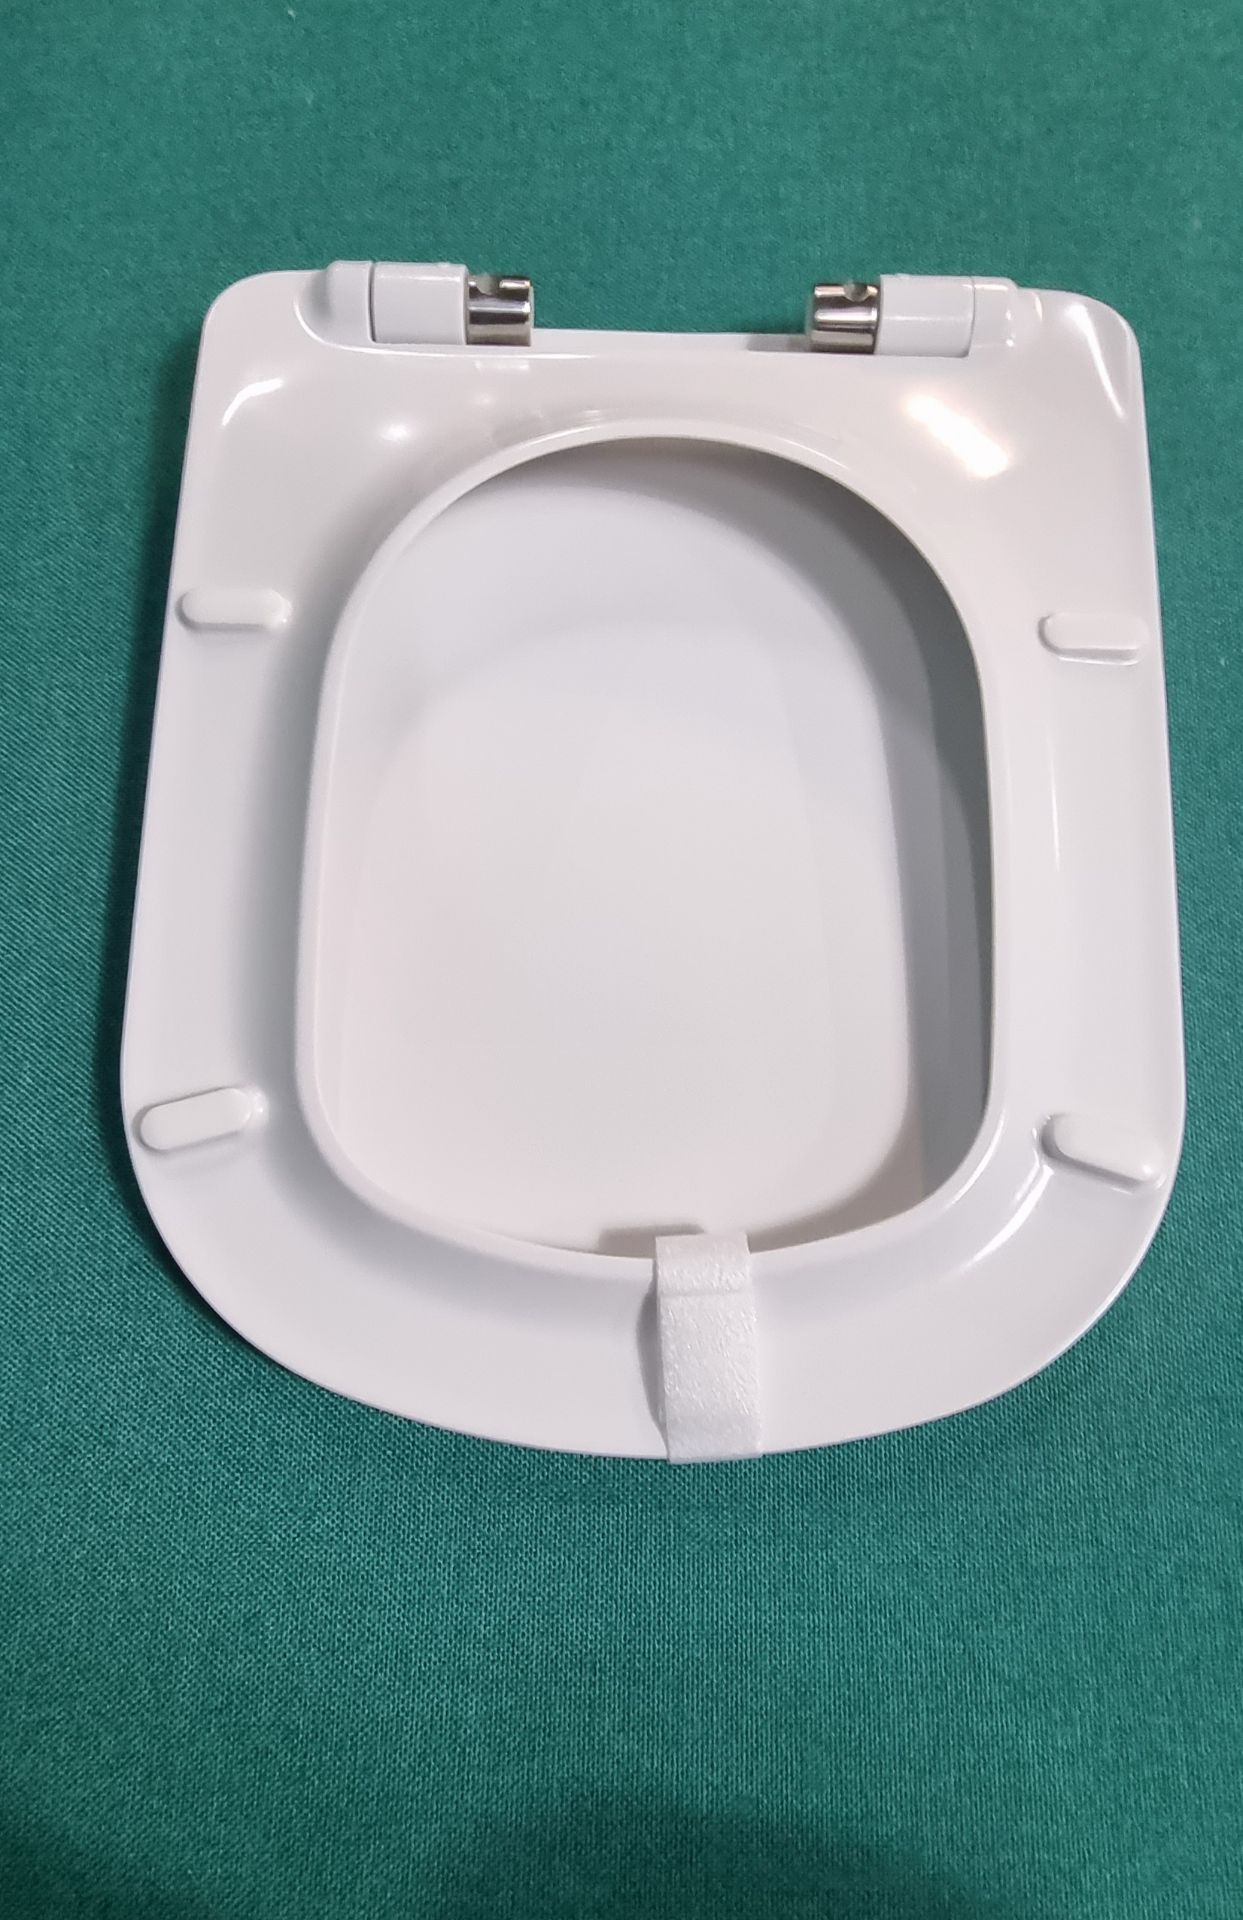 Ex-Display Liberty Duraplast S10150 Soft Close Quick Release Toilet Seat White - Image 5 of 7